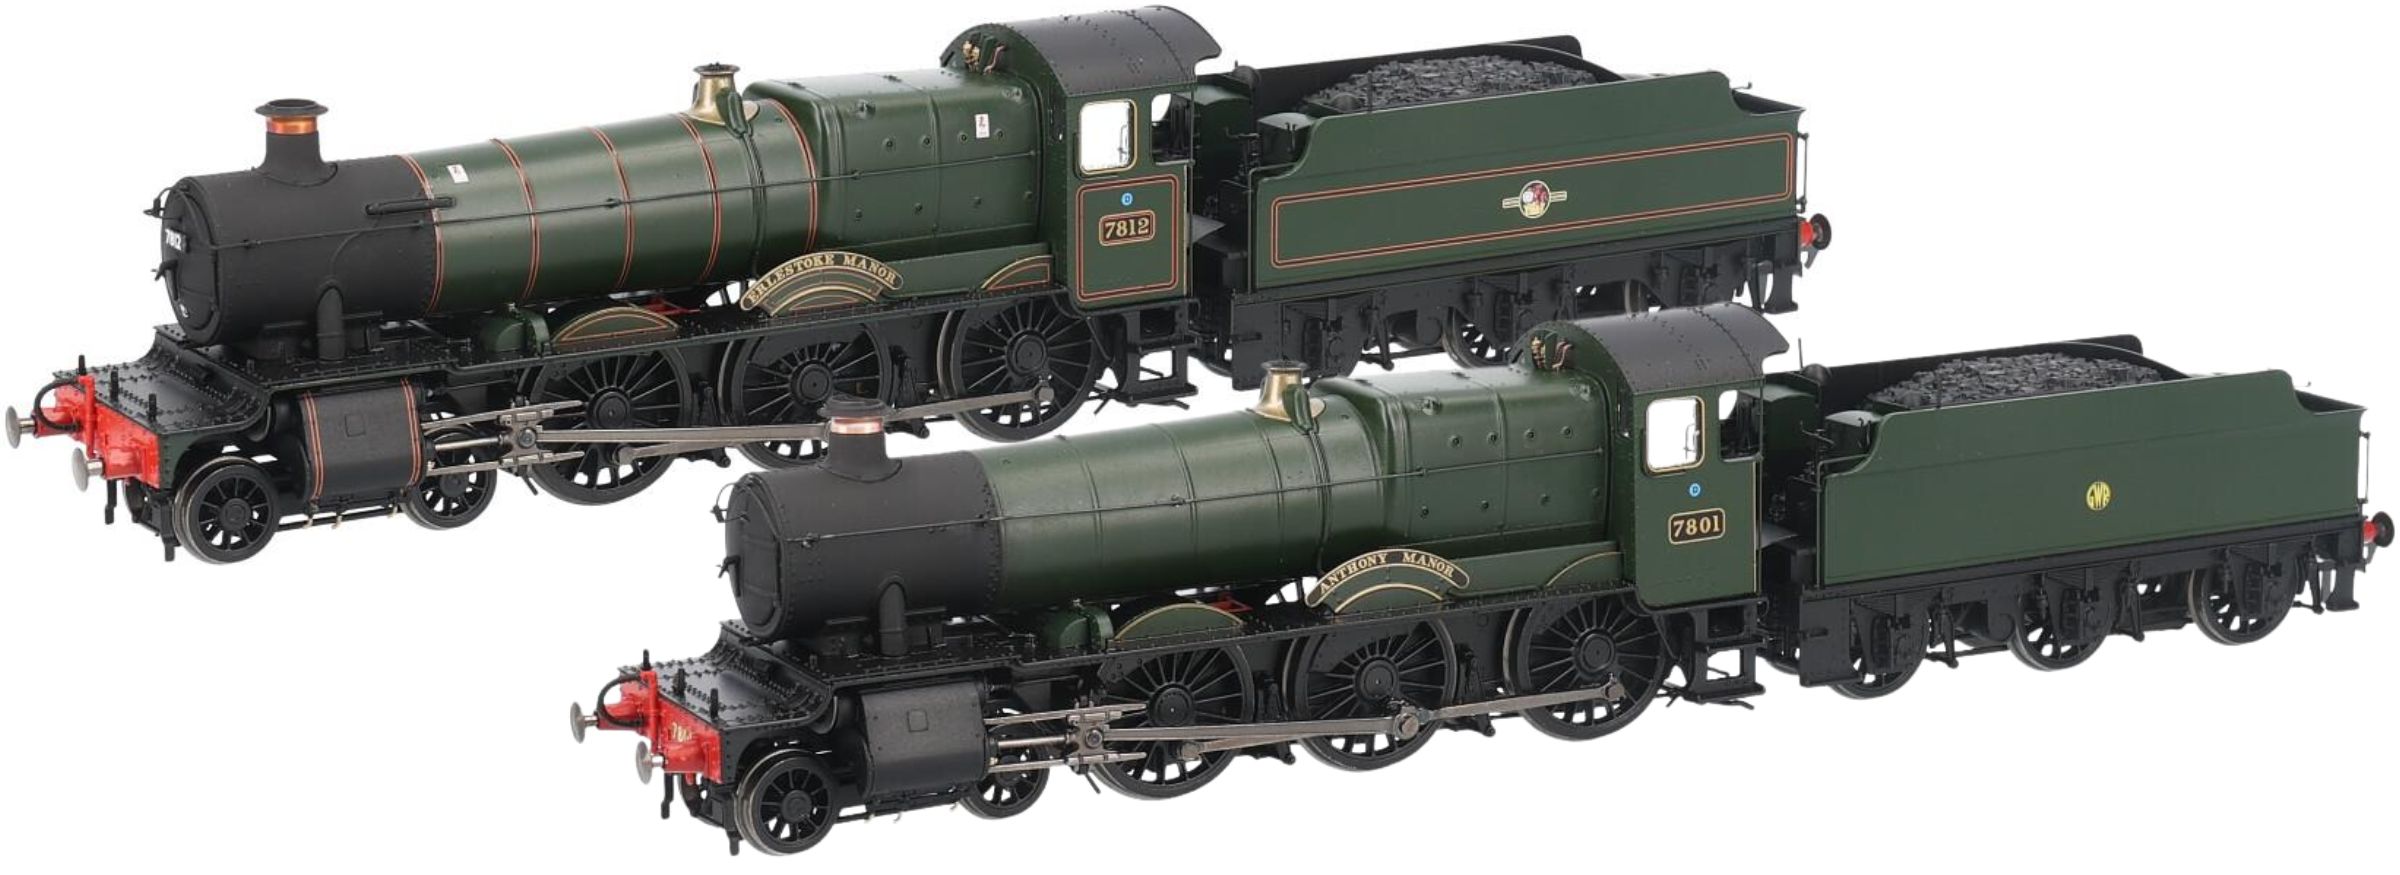 Accurascale OO Gauge (1:76 Scale) 4-6-0 Class 78xx Manor GWR